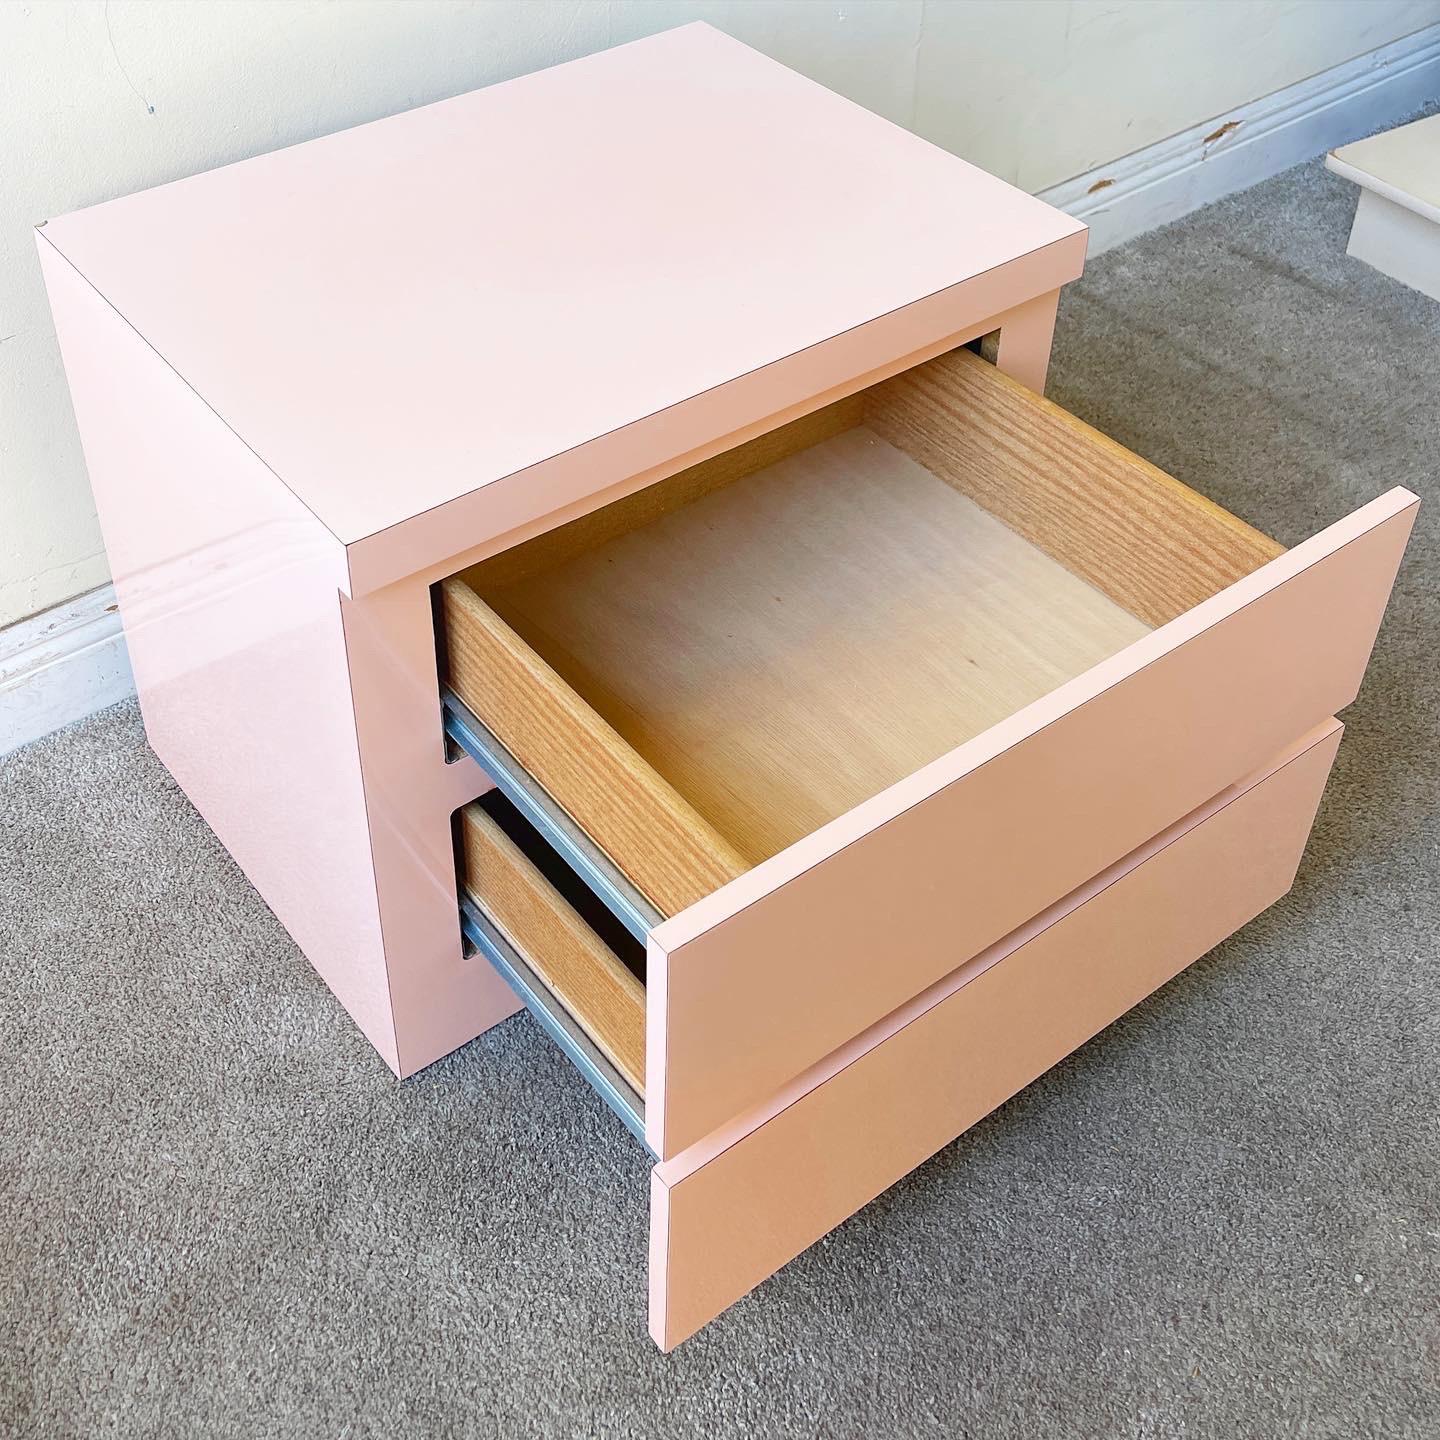 Amazing postmodern nightstand with 2 spacious drawers. Features a pink lacquer laminate.

Additional information:
Material: Wood
Color: Pink
Style: Postmodern
Time Period: 1980s
Place of origin: USA
Dimension: 23